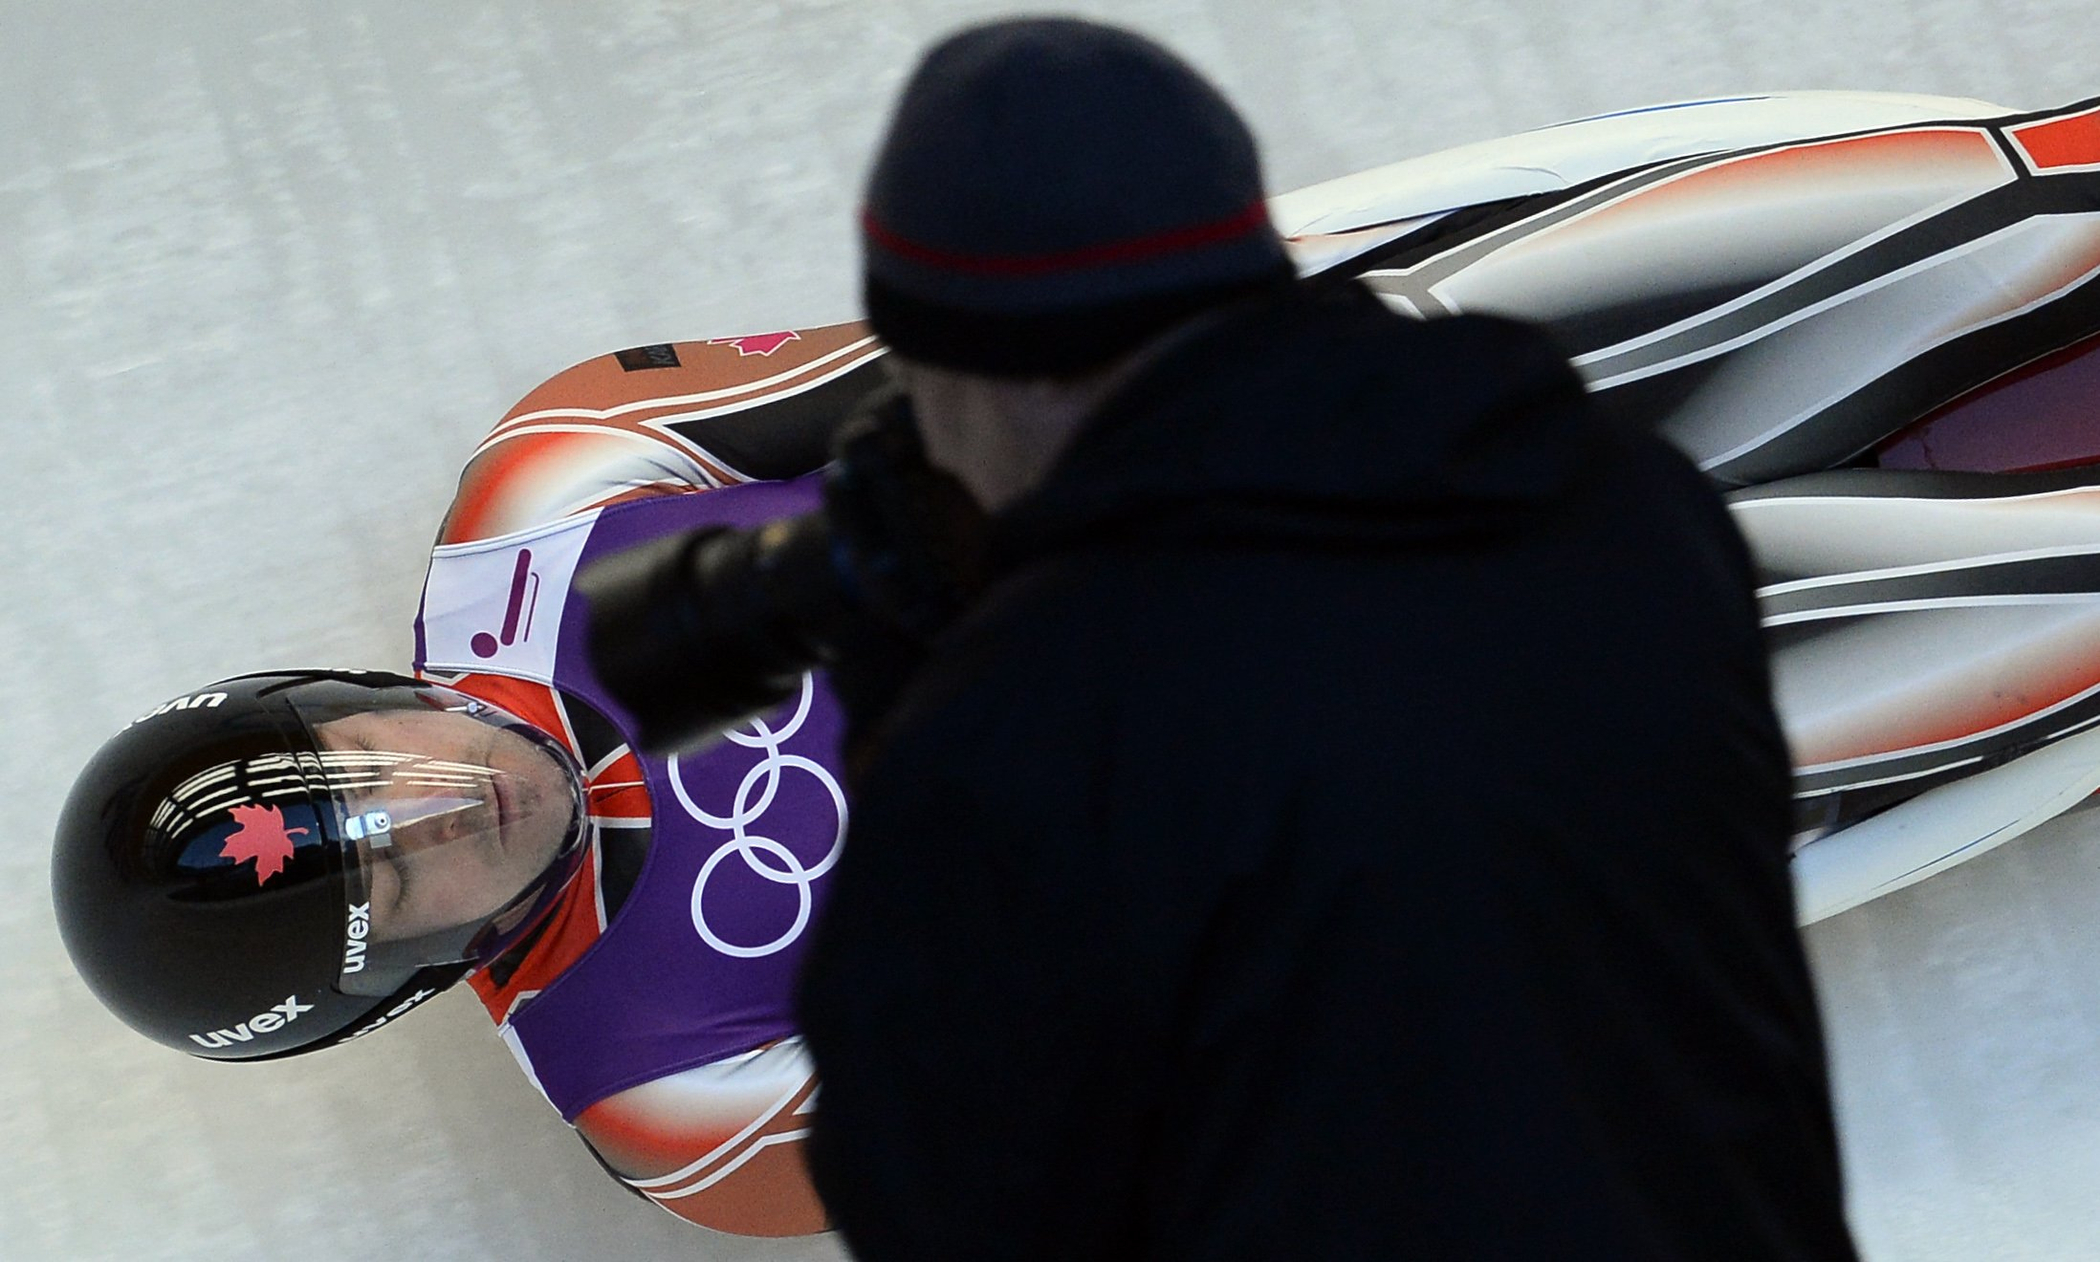 A photographer shoots an image of Canada's Sam Edney during a practices run at the men's Luge training session at the Sanki Sliding Centre in Rosa Khutor on Feb. 6, 2014, on the eve of the Sochi 2014 Olympic opening ceremony.